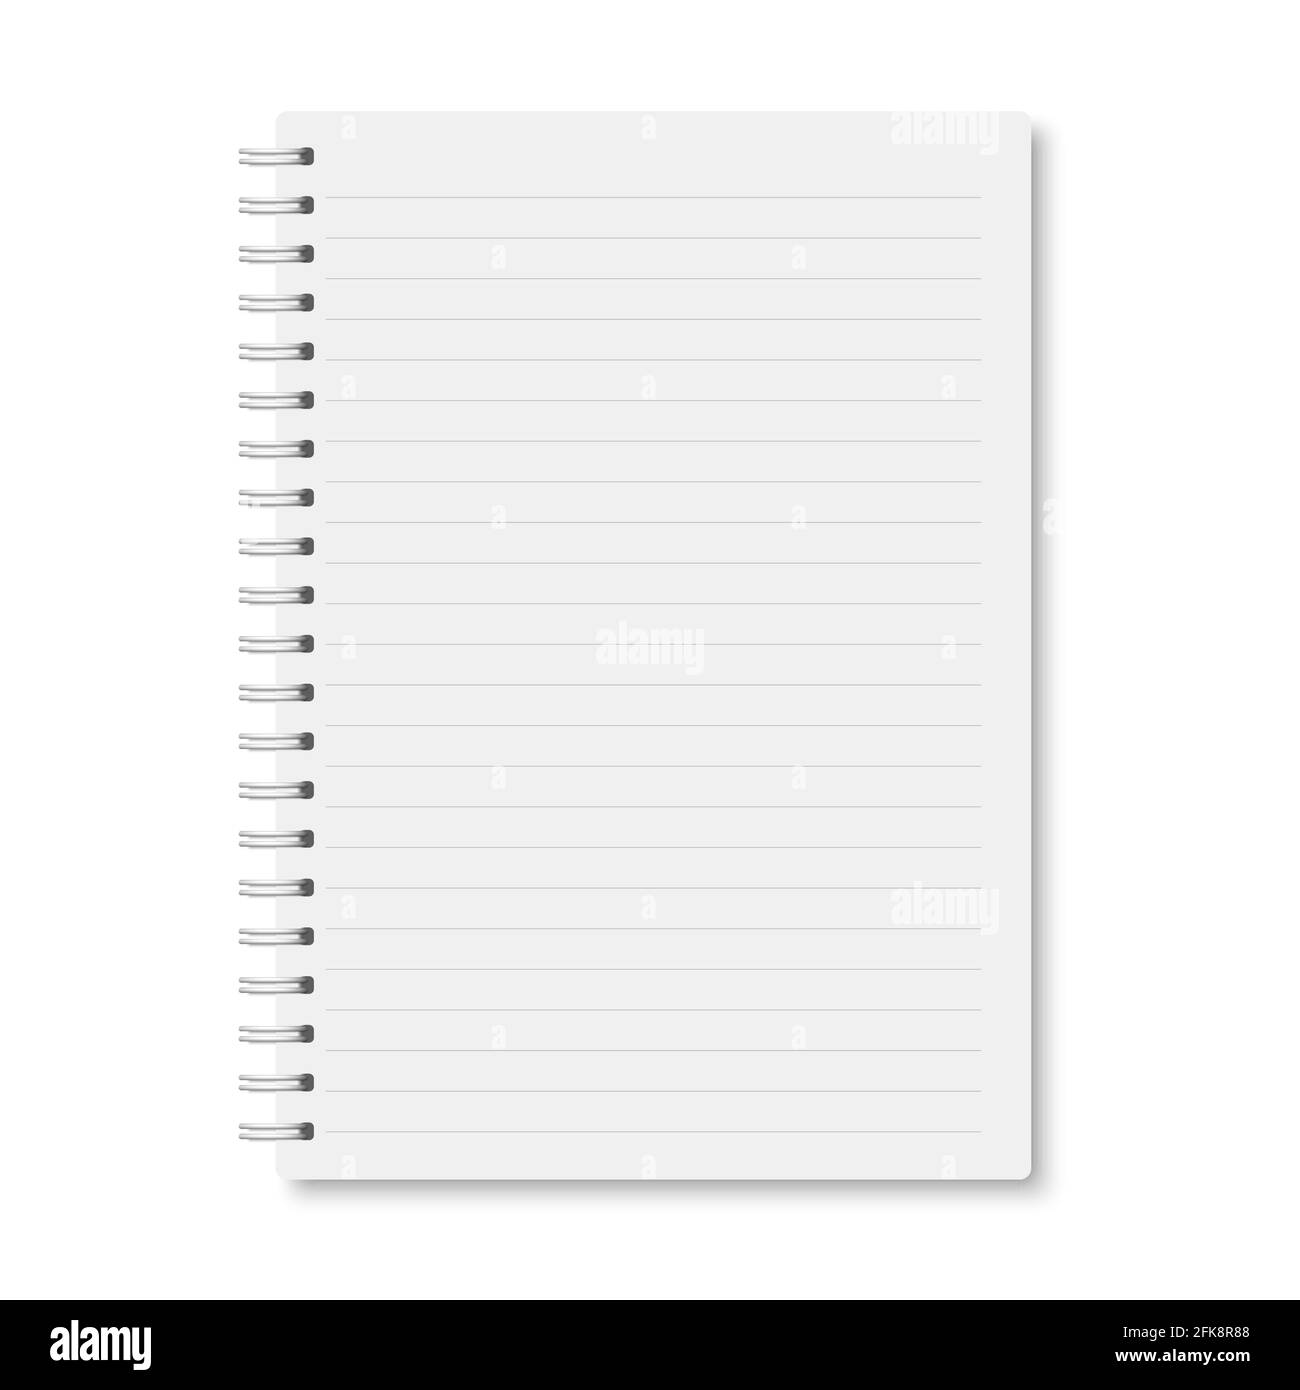 Blank realistic notebook size a4 isolated on white